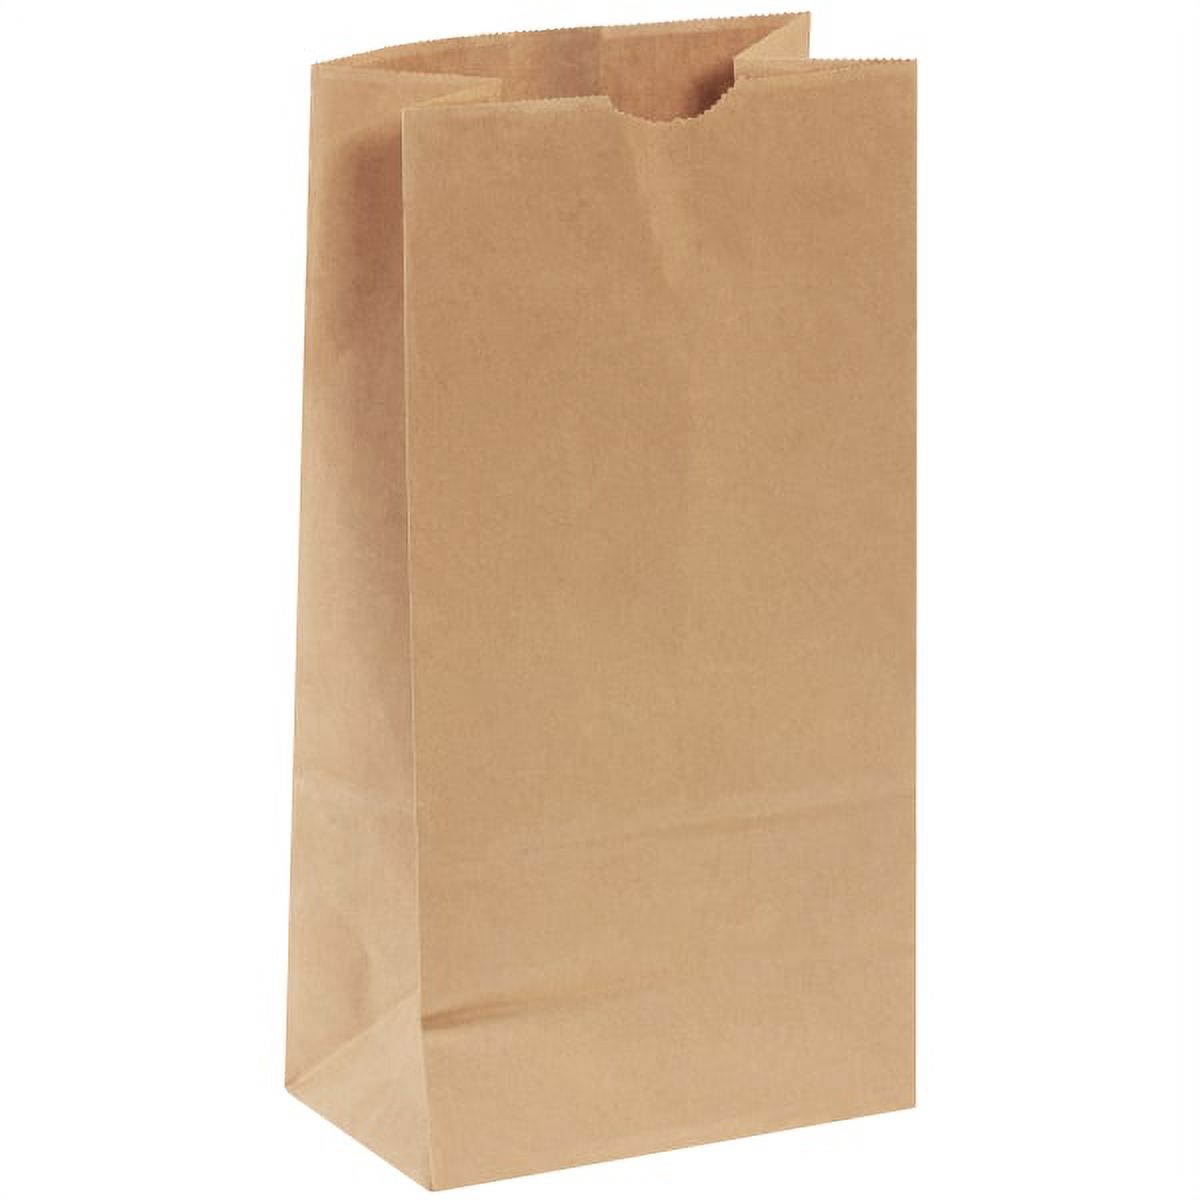 Picture of Box Partners BGH128K Kraft Hardware Bags - 7.125 x 4.5 x 13.75 in.